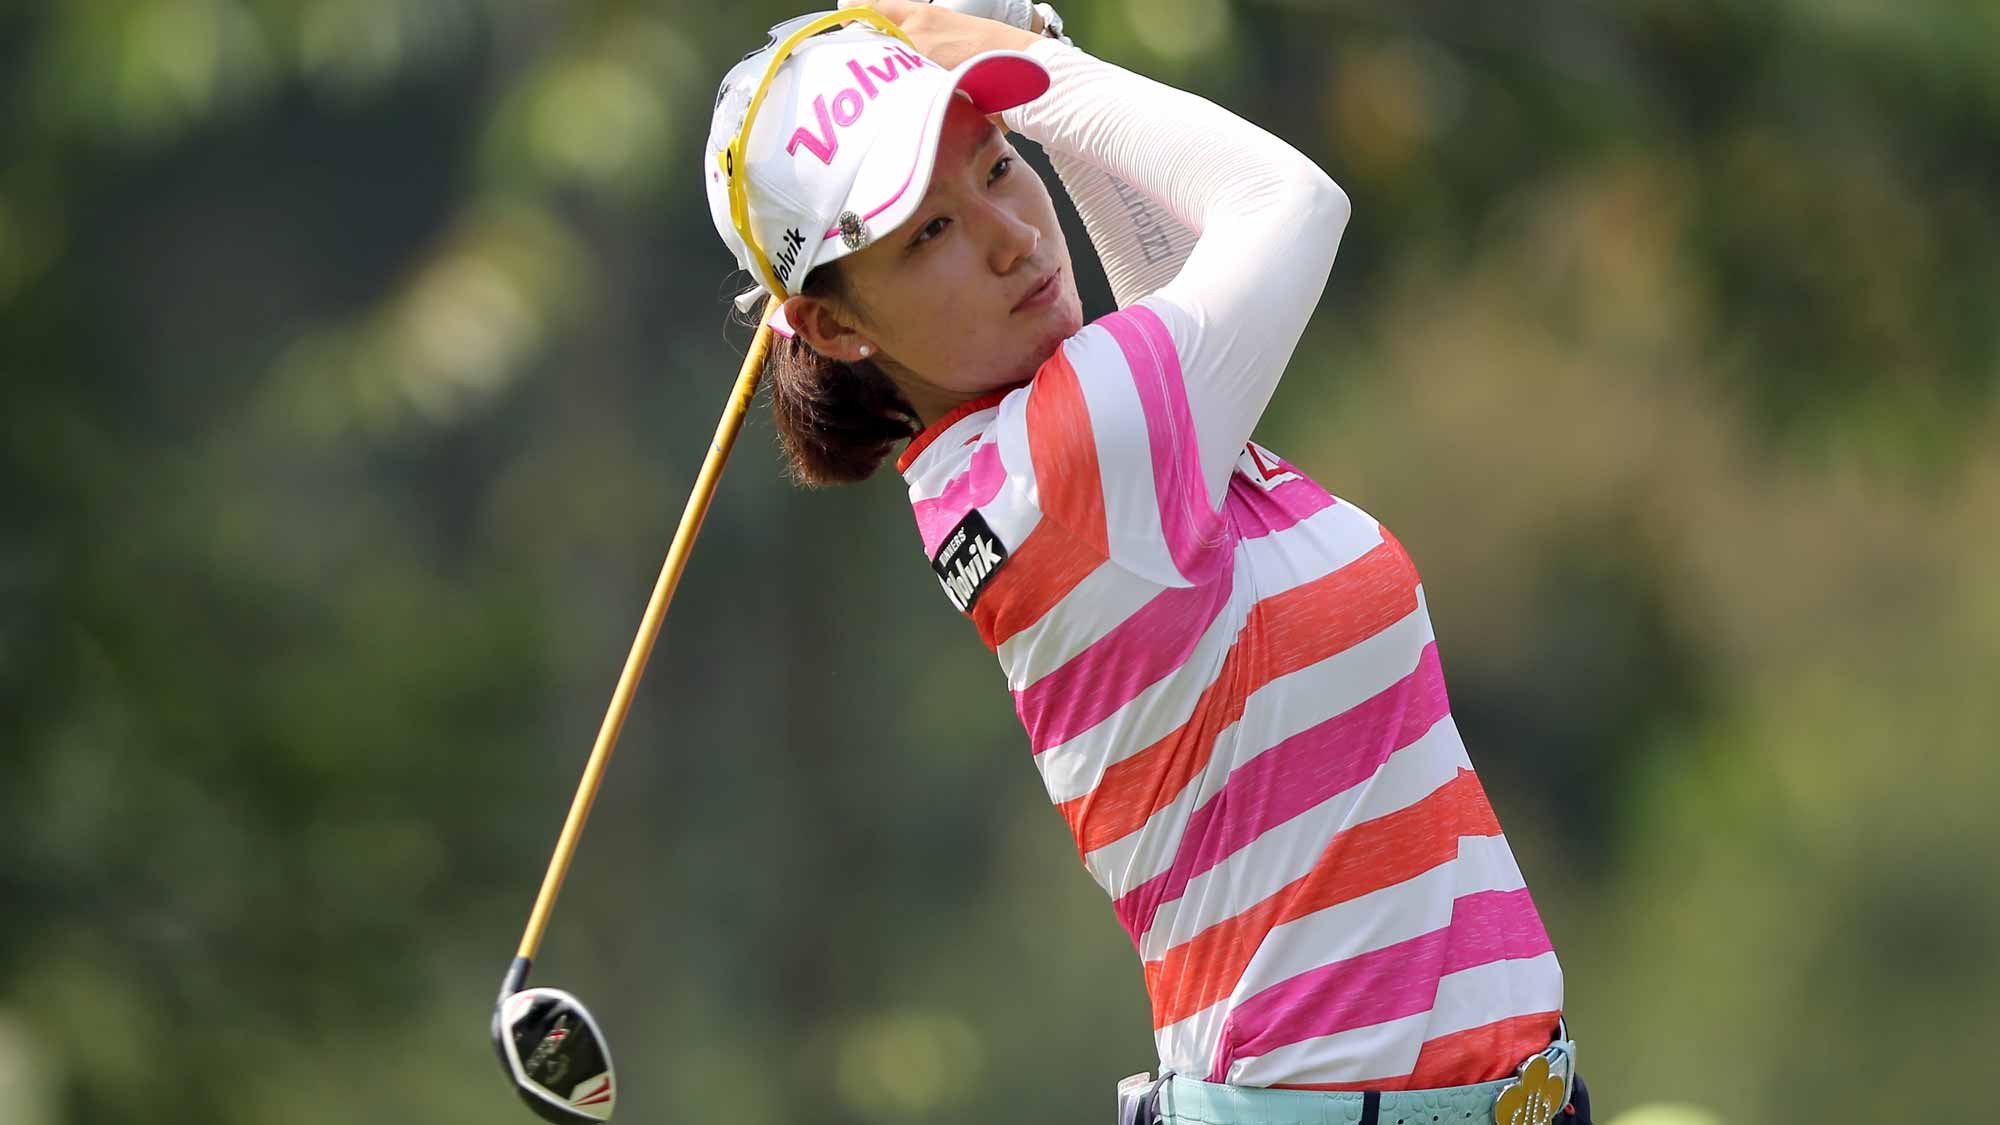 Chella Choi of South Korea plays her tee shot on the 4th hole during round two of the Sime Darby LPGA Tour at Kuala Lumpur Golf & Country Club